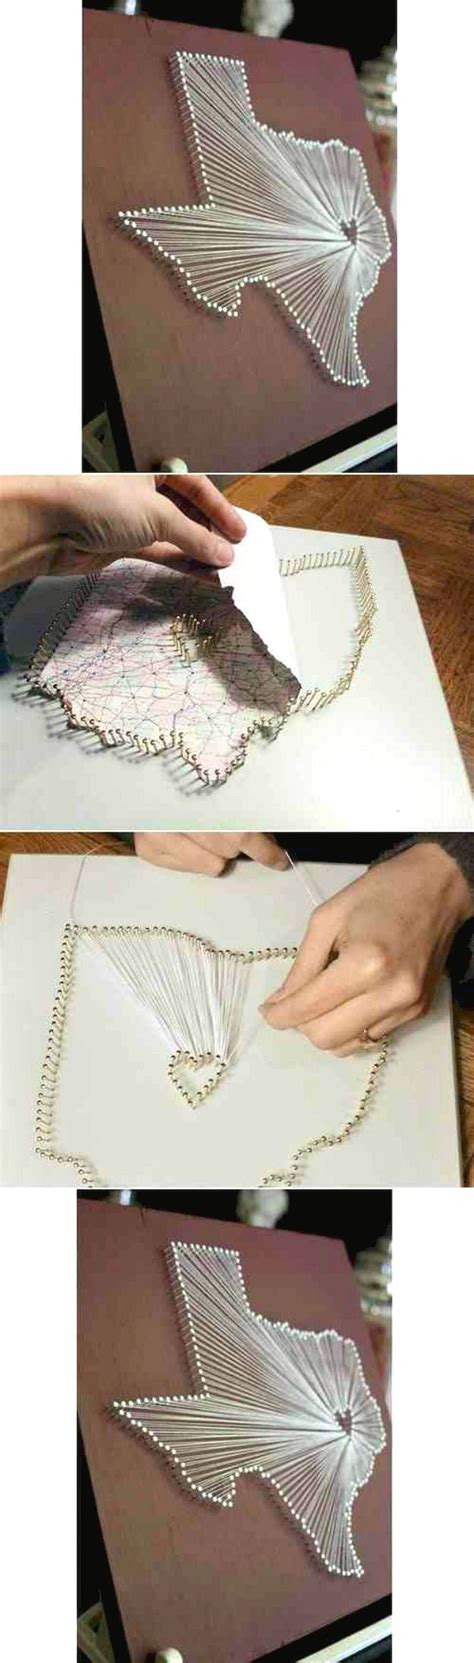 Nothing says i love you like a unique gift you've made with your own two hands. Lovelyving - Architecture and Design Ideas | Collage diy ...